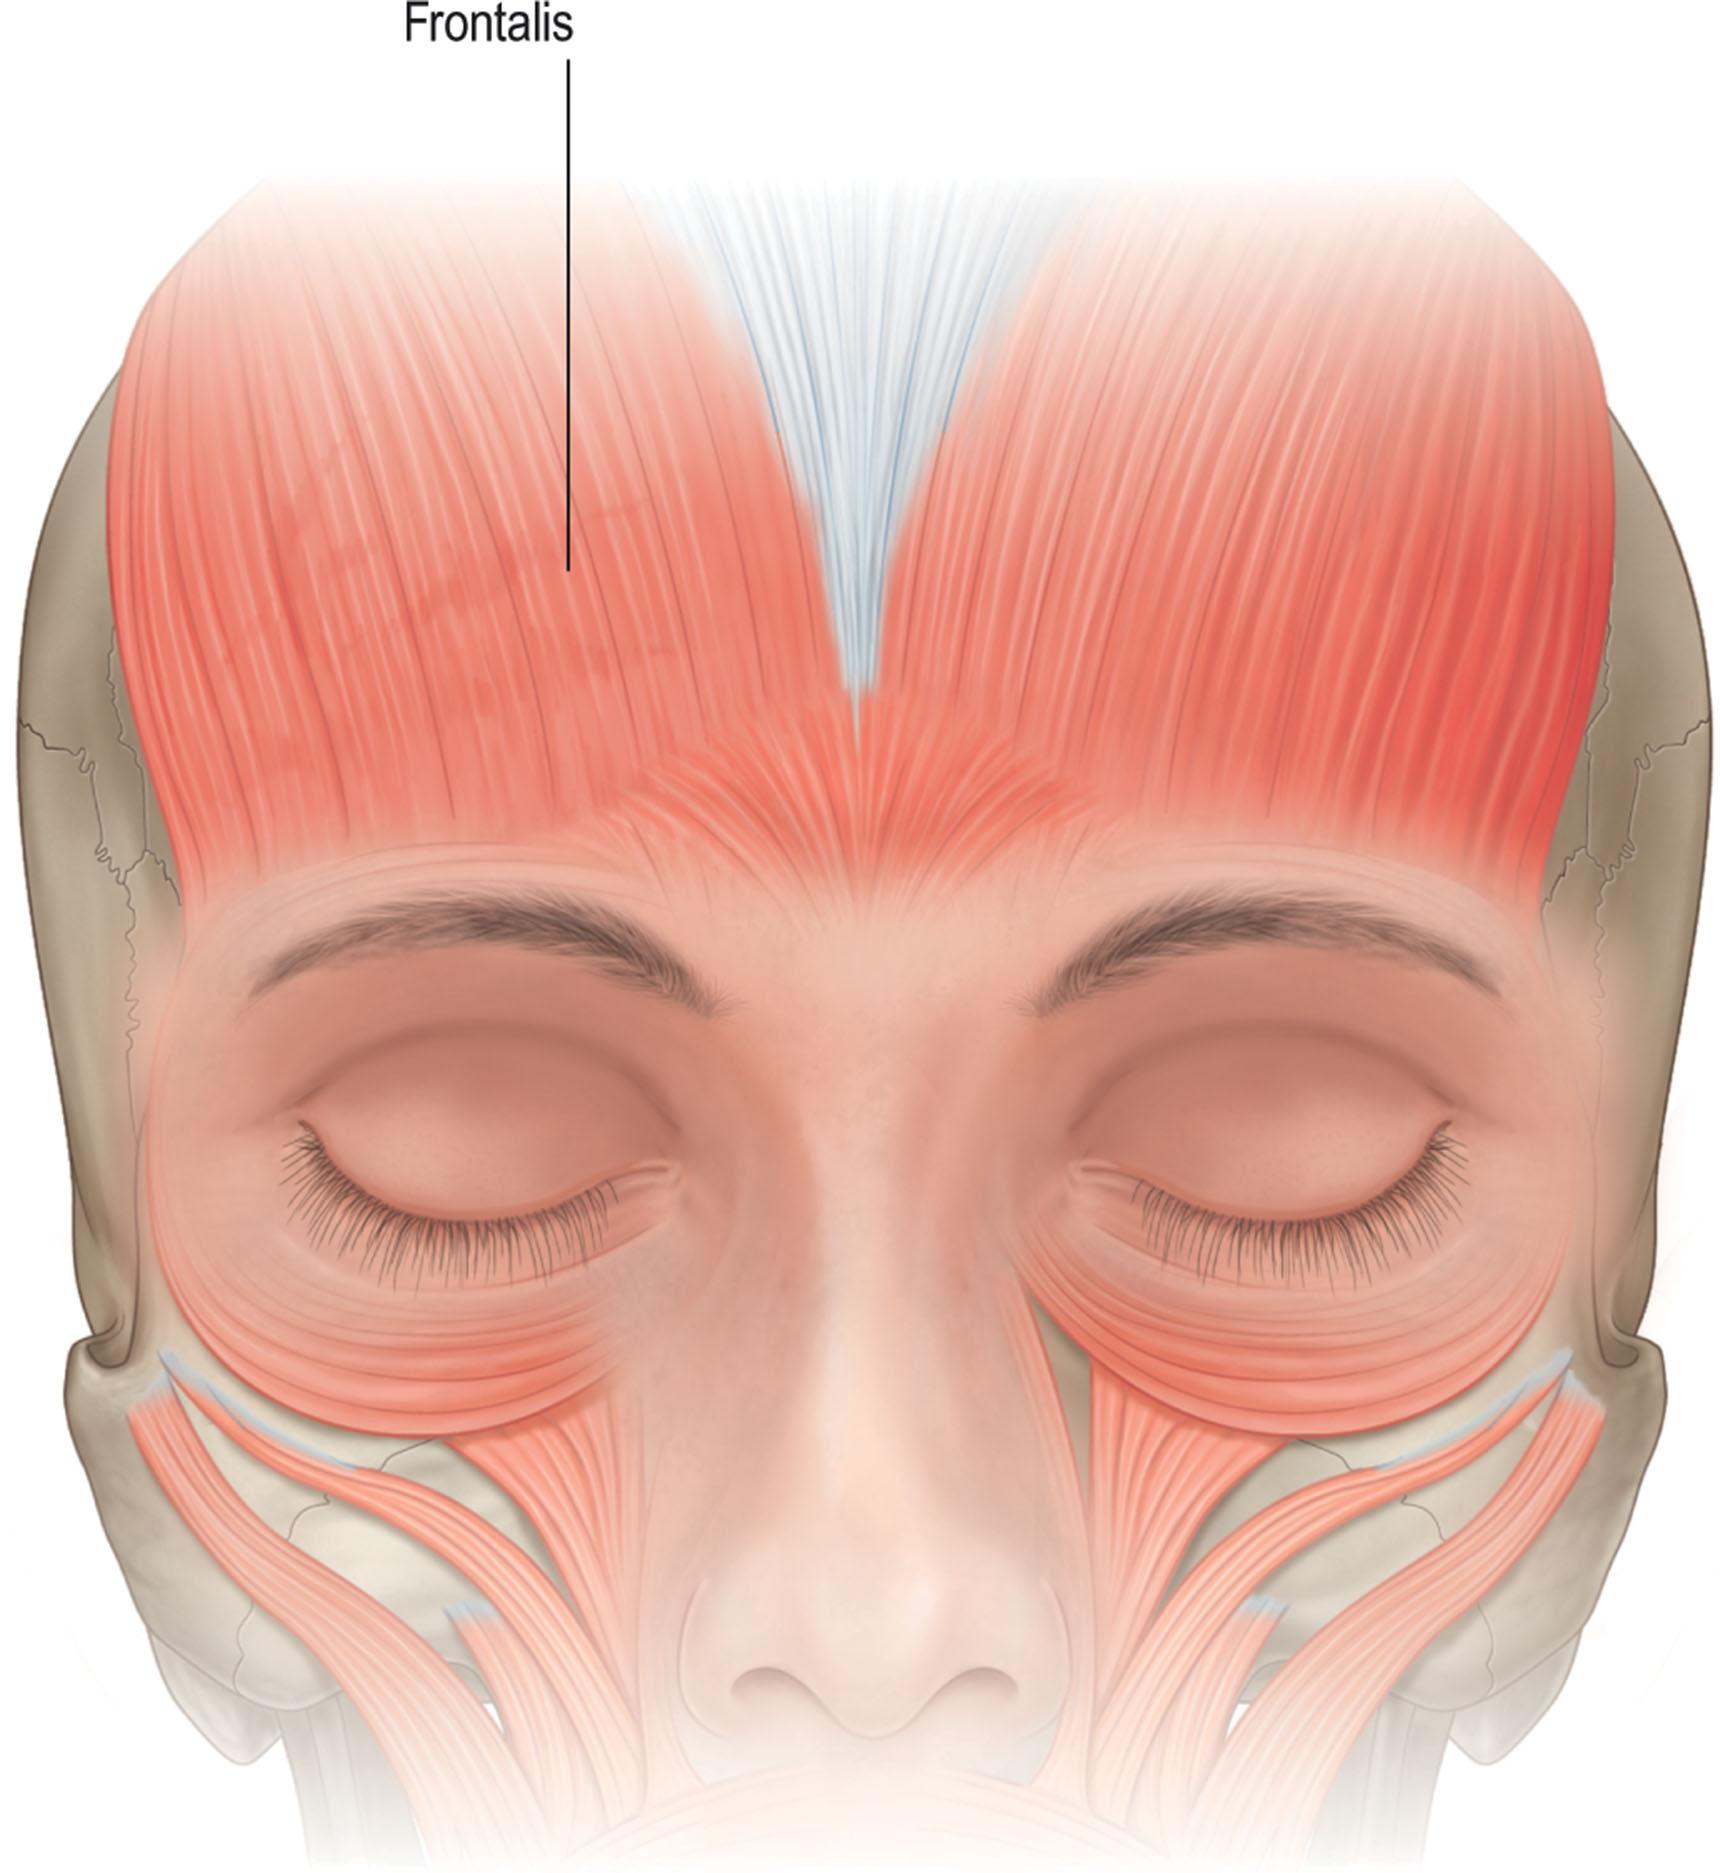 Figure 13.7, The frontalis muscle inserts predominantly into the medial half or two-thirds of the eyebrow. The medial brow responds to frontalis activation and elevates, often excessively, in its drive to clear lateral overhang.